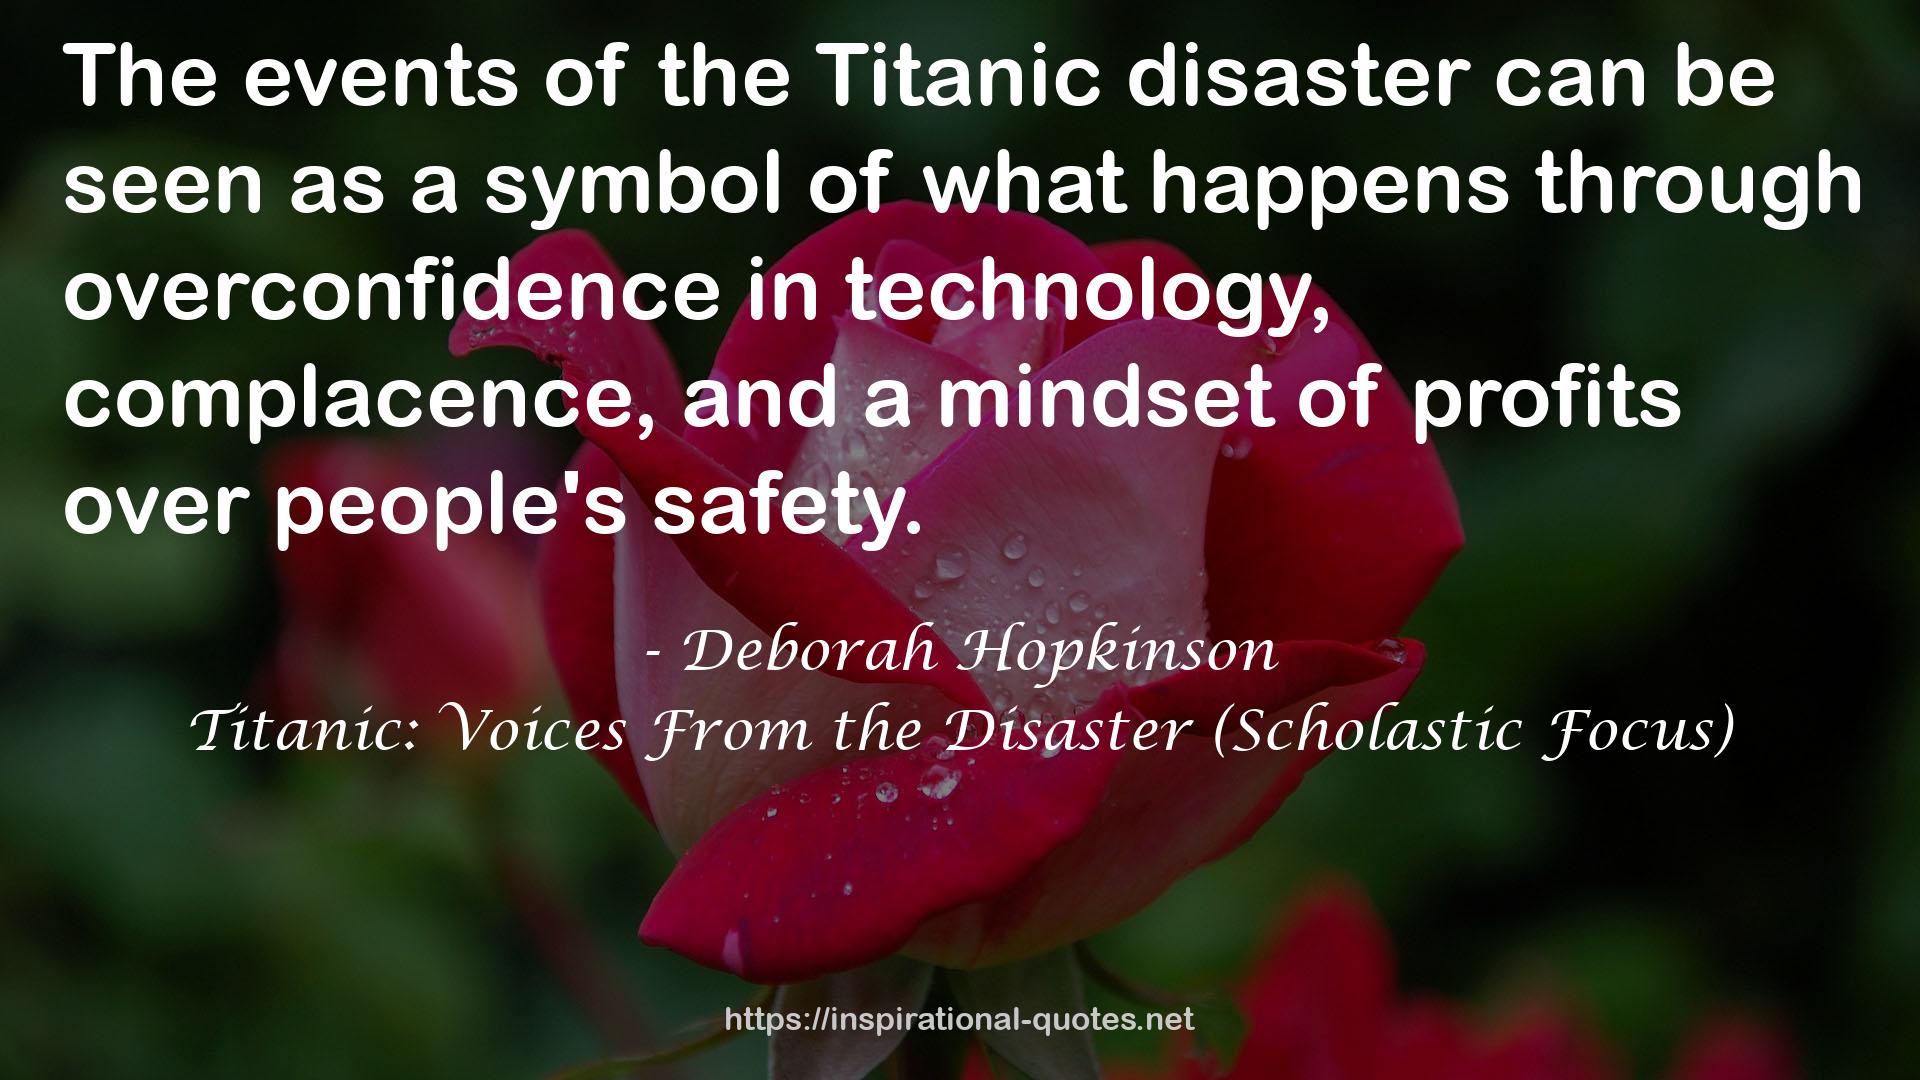 Titanic: Voices From the Disaster (Scholastic Focus) QUOTES